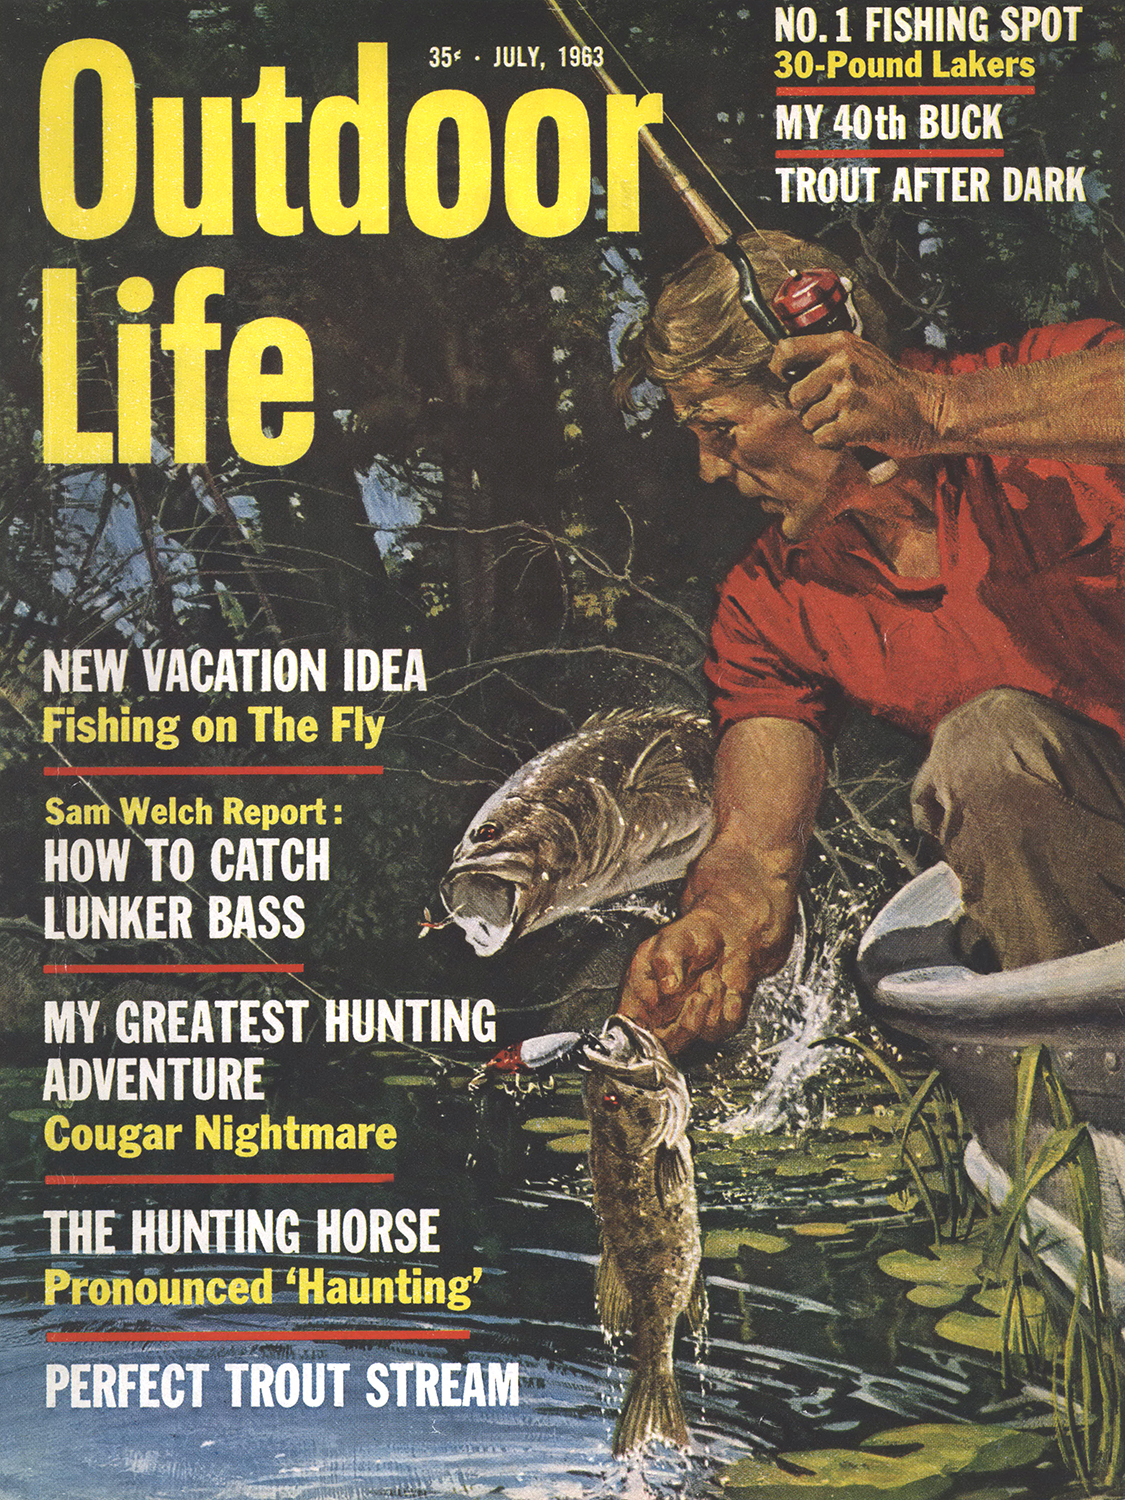 July 1963 cover of Outdoor Life shows man fishing for bass.